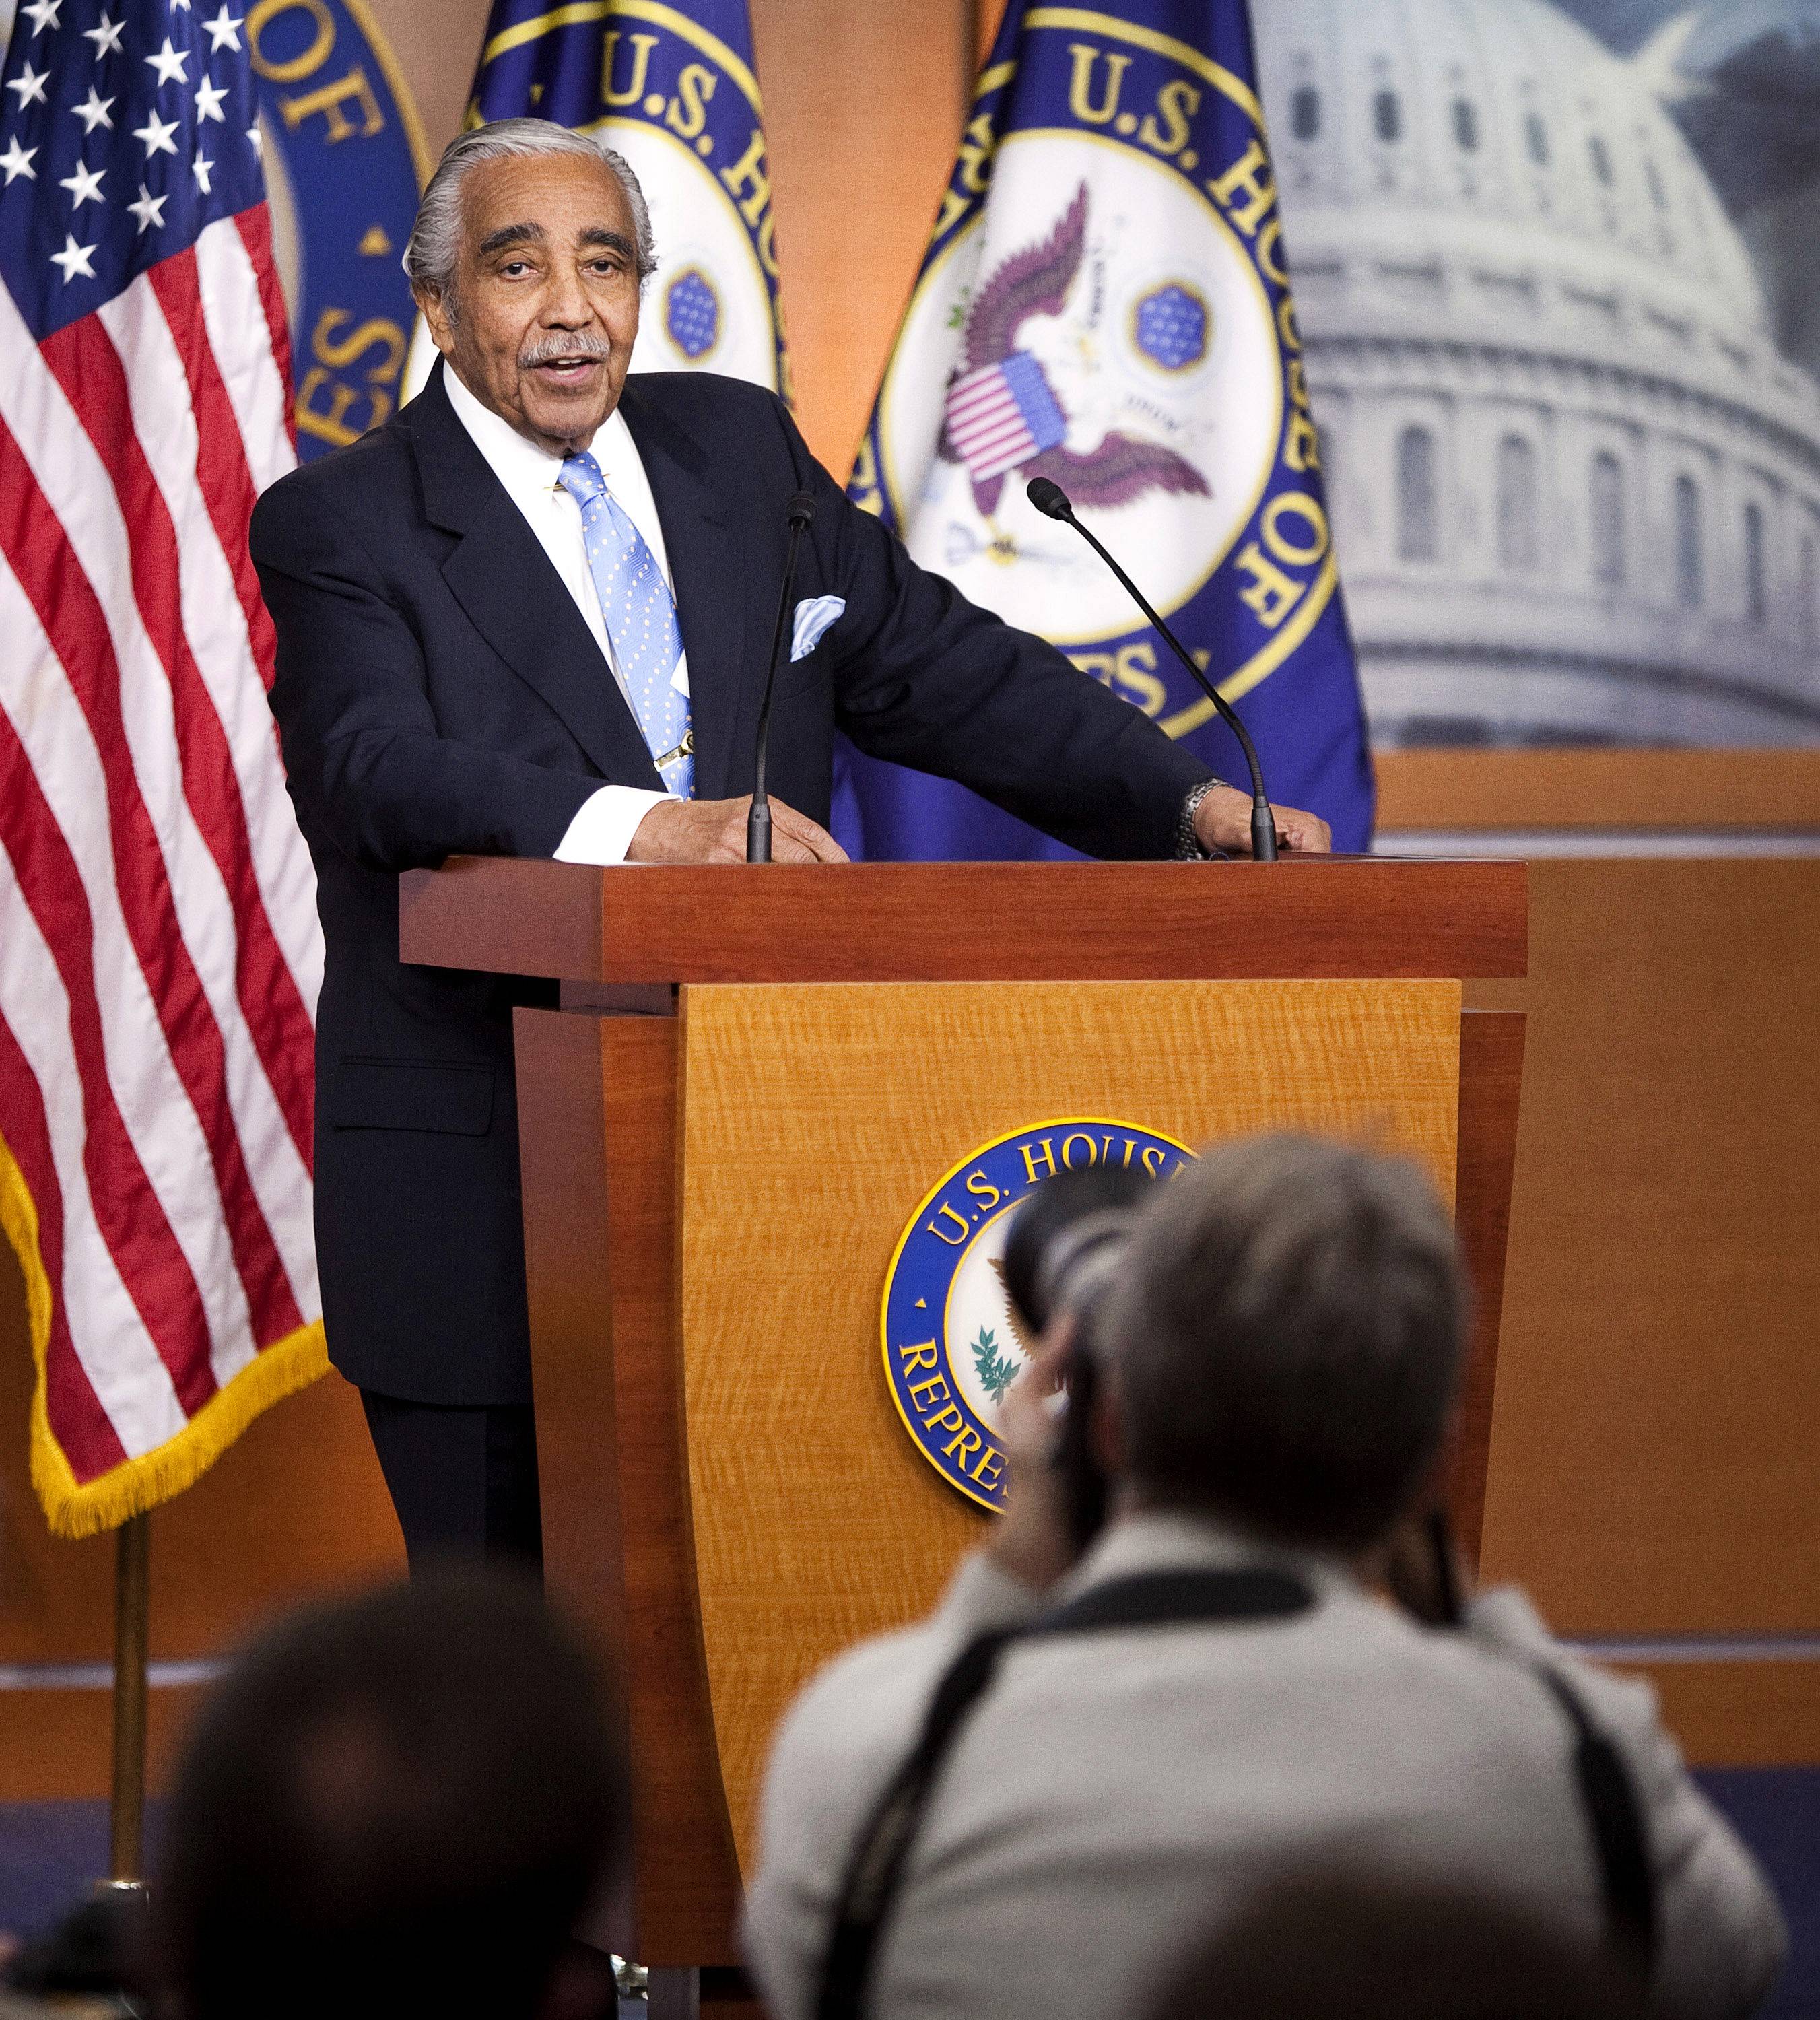 Congressman Charles Rangel - The veteran Congressman did his part to advocate on behalf of September 11 victims when he managed to get unemployment benefits extended for workers after the attacks. The benefits were of particular help to many New Yorkers working in the travel and lodging industries, which were economically hit hard by the attacks.&nbsp;(Photo: Joshua Roberts/Getty Images)